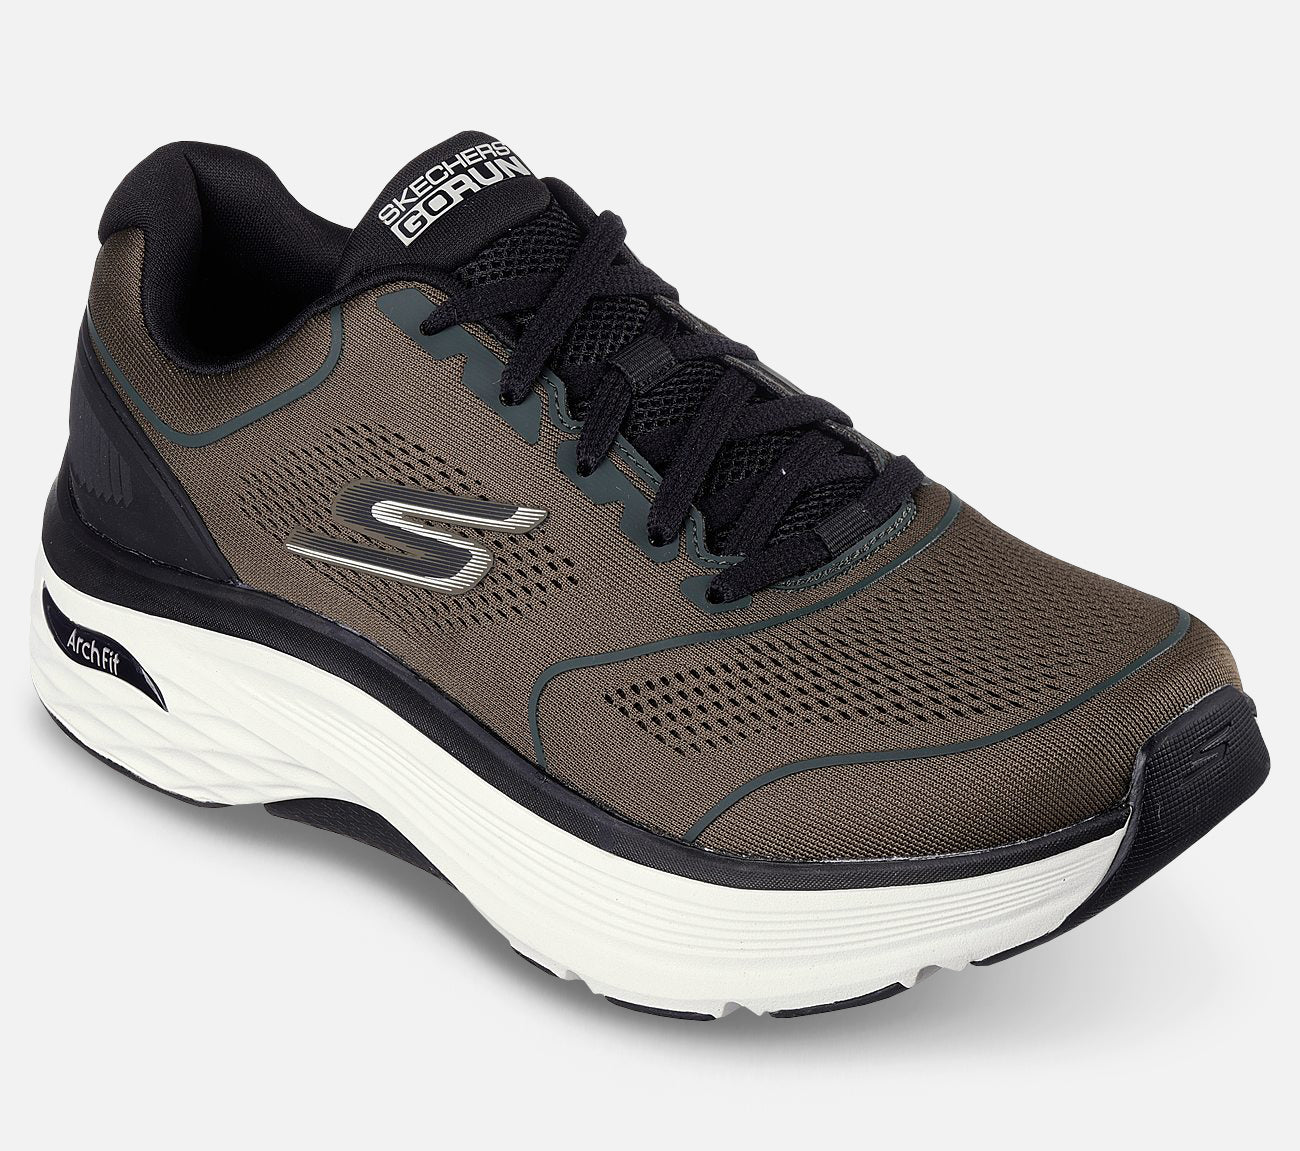 Max Cushioning Arch Fit – Switchboard Shoe Skechers